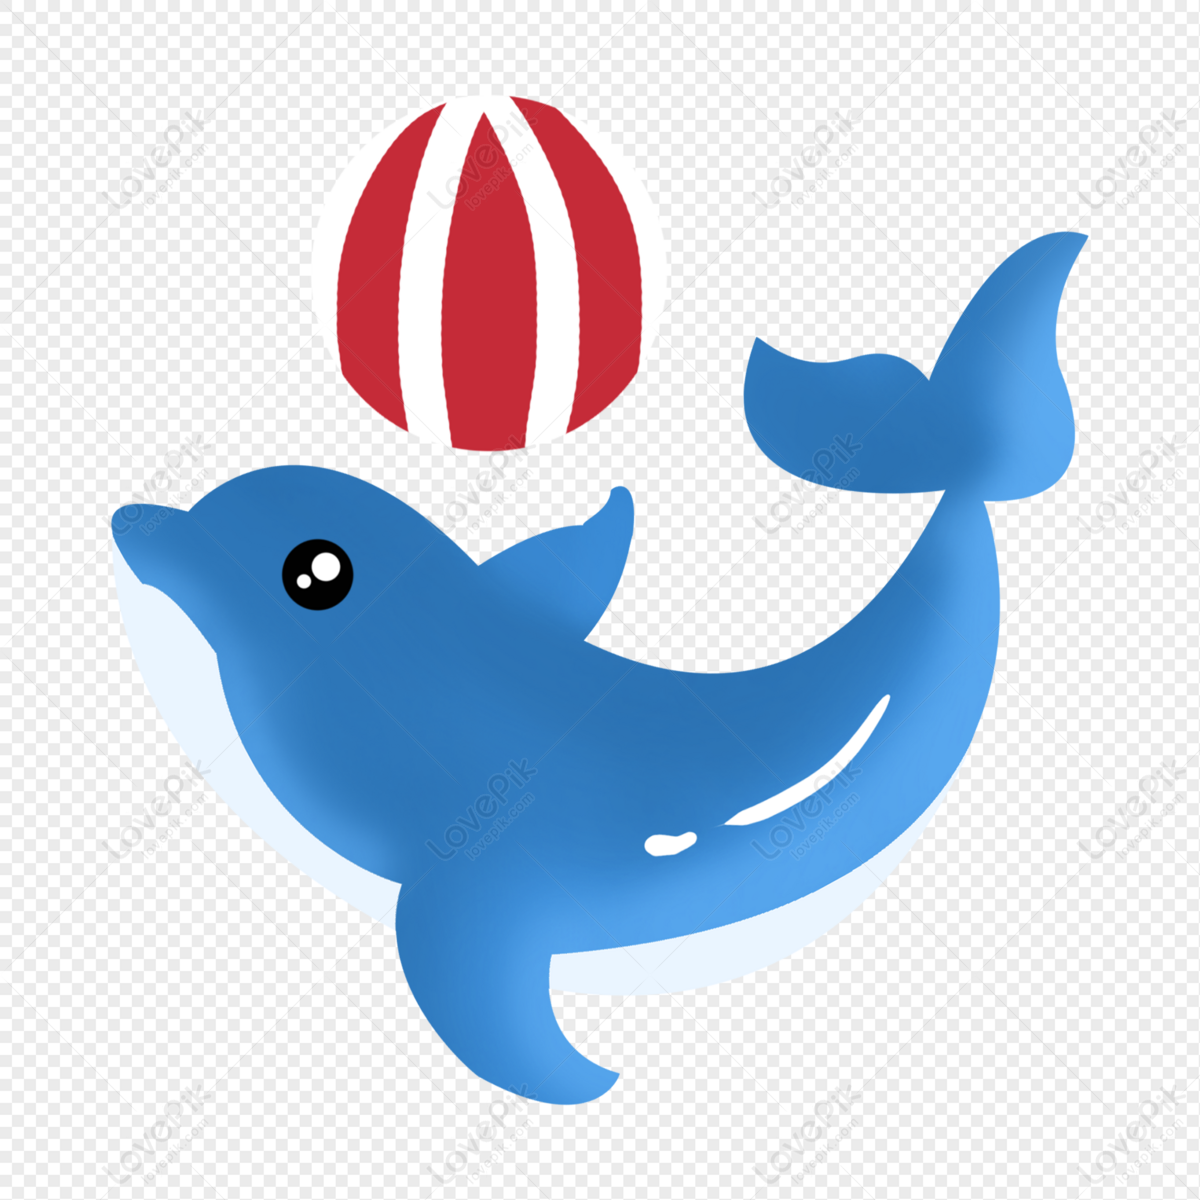 Dolphin Show PNG Image And Clipart Image For Free Download - Lovepik |  401338338